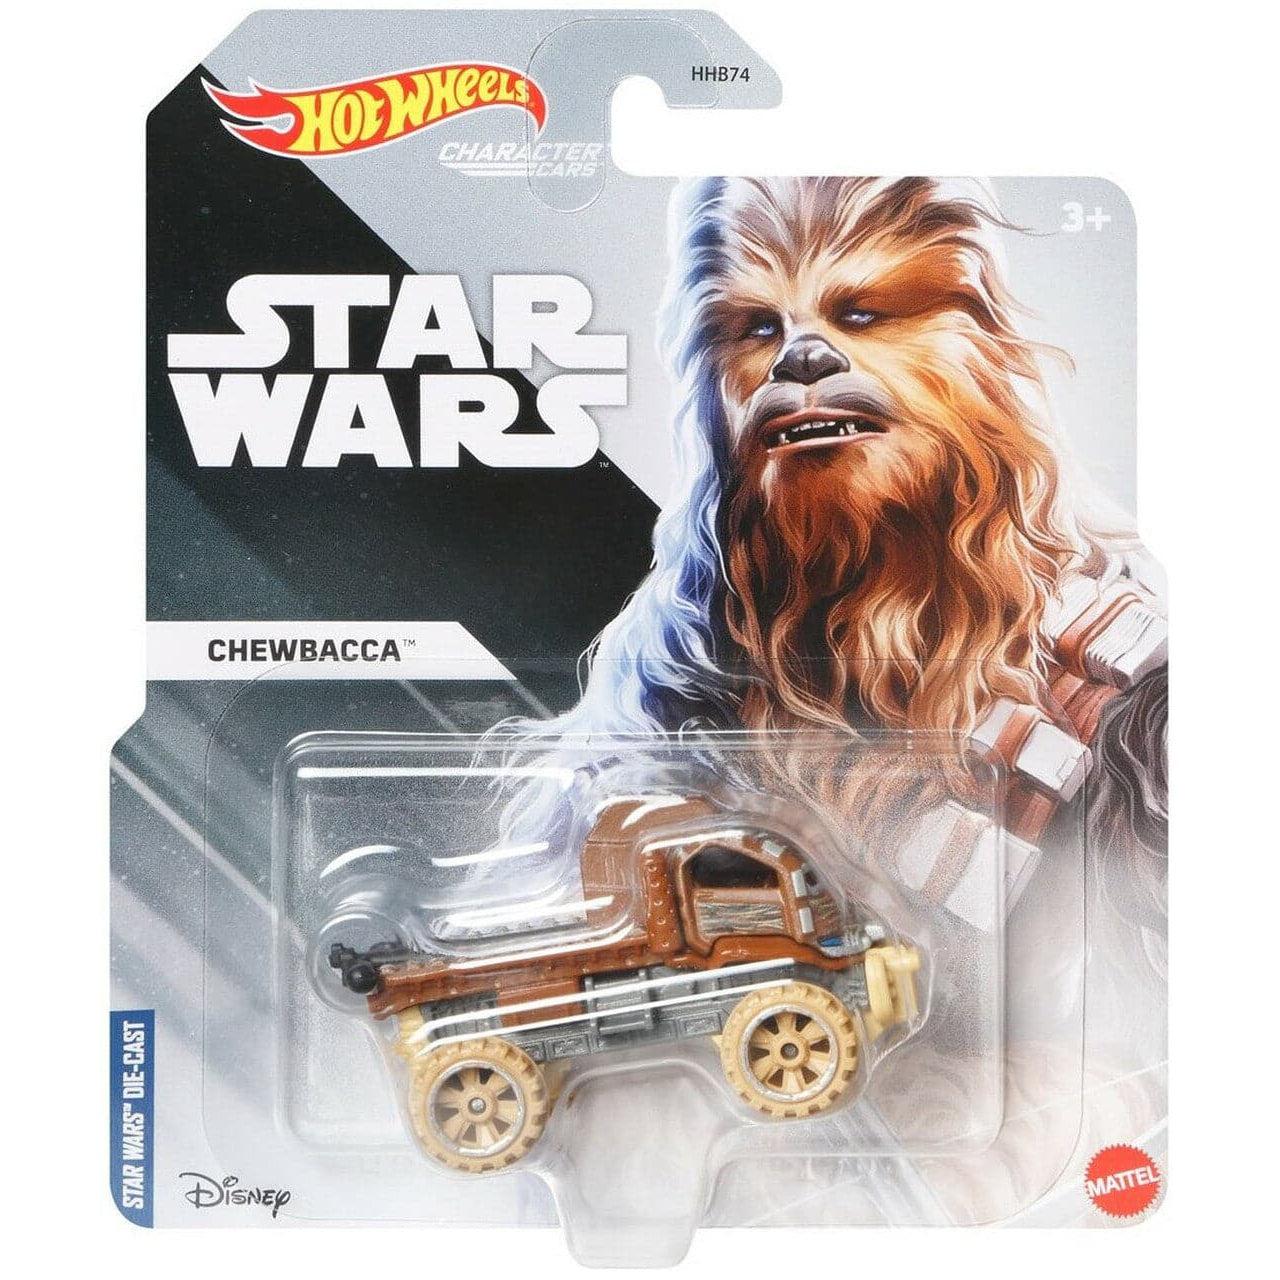 Mattel-Hot Wheels Star Wars Character Cars-HGY06-Chewbacca-Legacy Toys